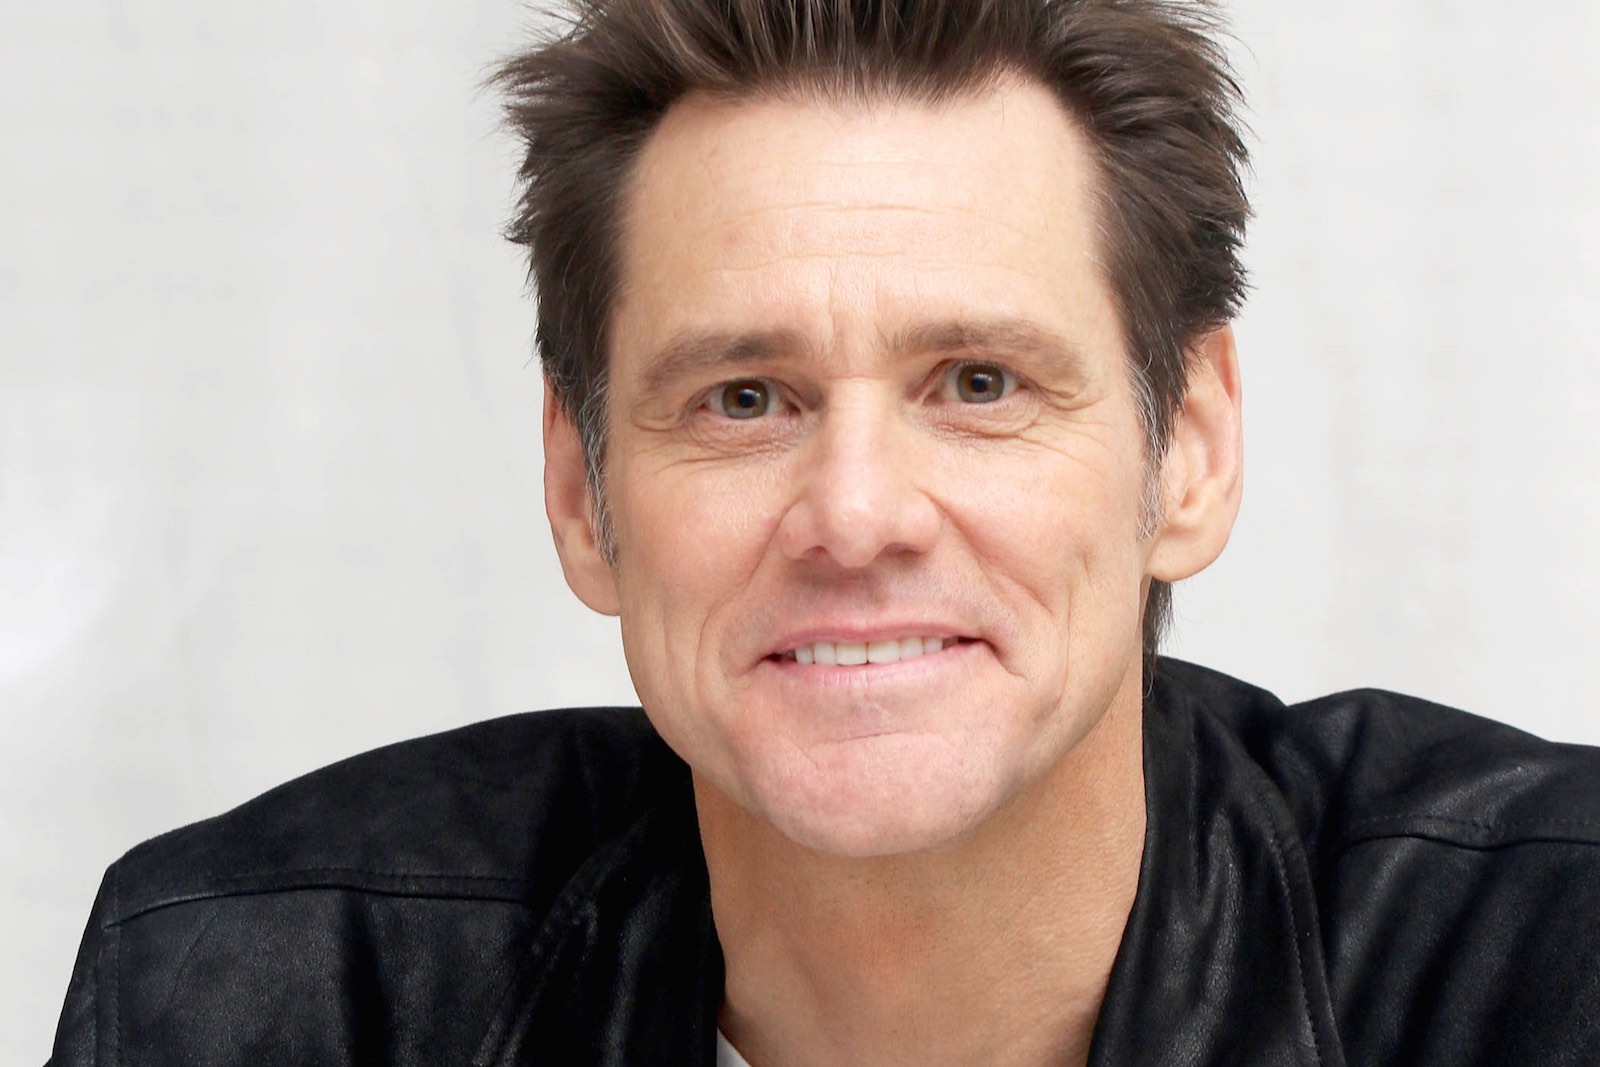 Everyone Knows These 24 Celebrities, But Do You Know Where They Were Born? Jim Carrey